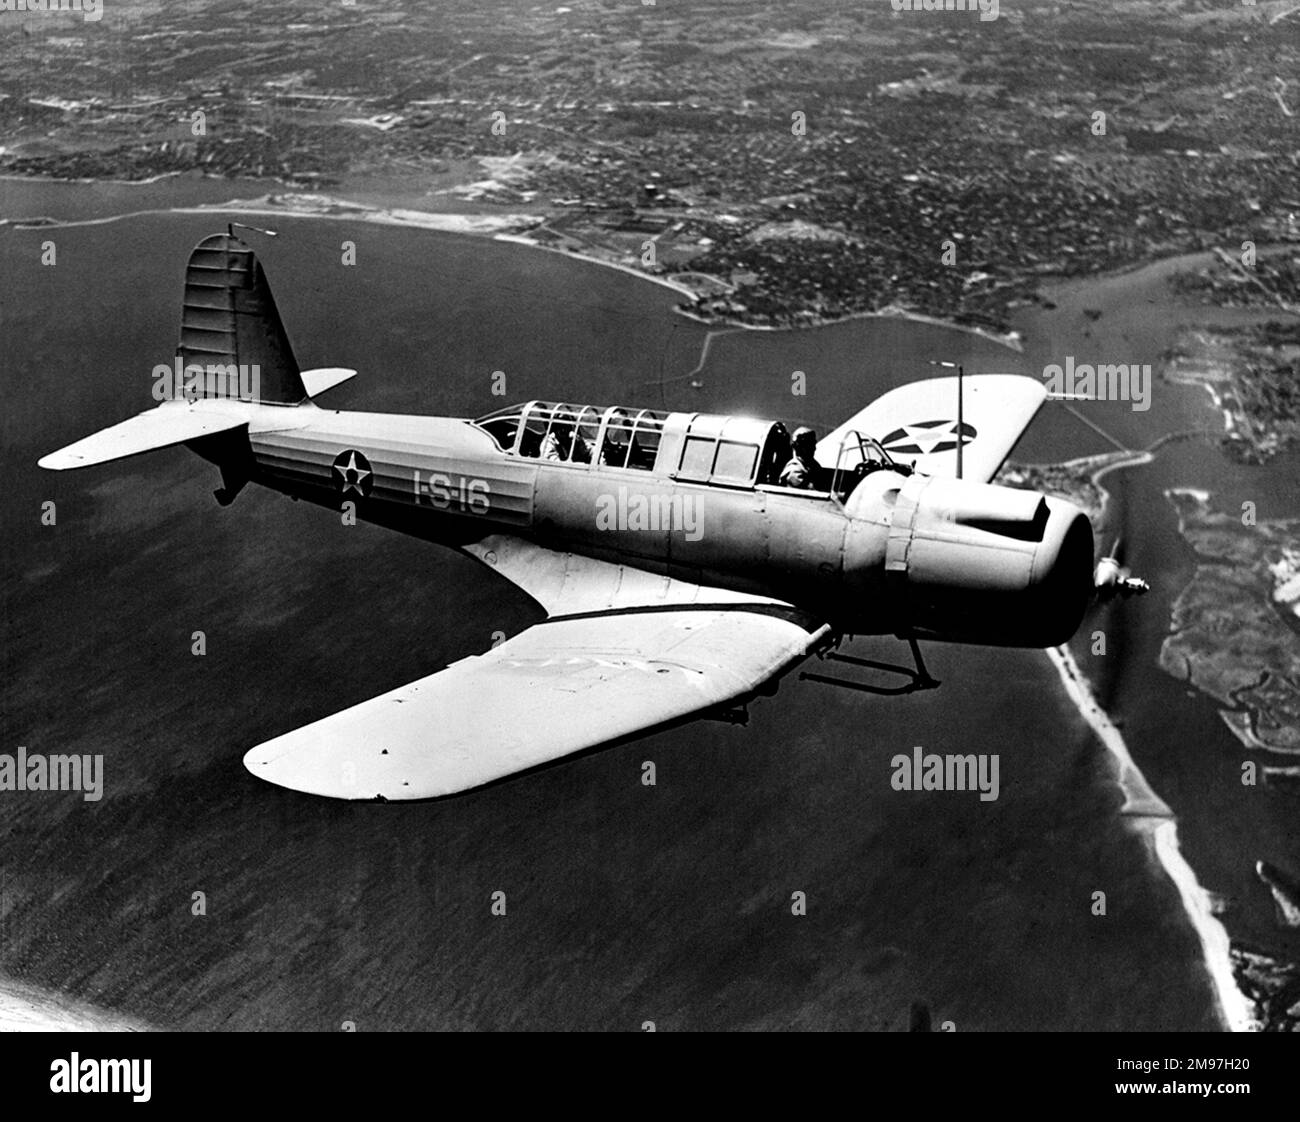 Vought SB2U-1 Vindicator -like the Douglas TBD Devastator, this carrier-going dive bomber suffered a severe mauling during the Battle of Midway in June 1942. Stock Photo